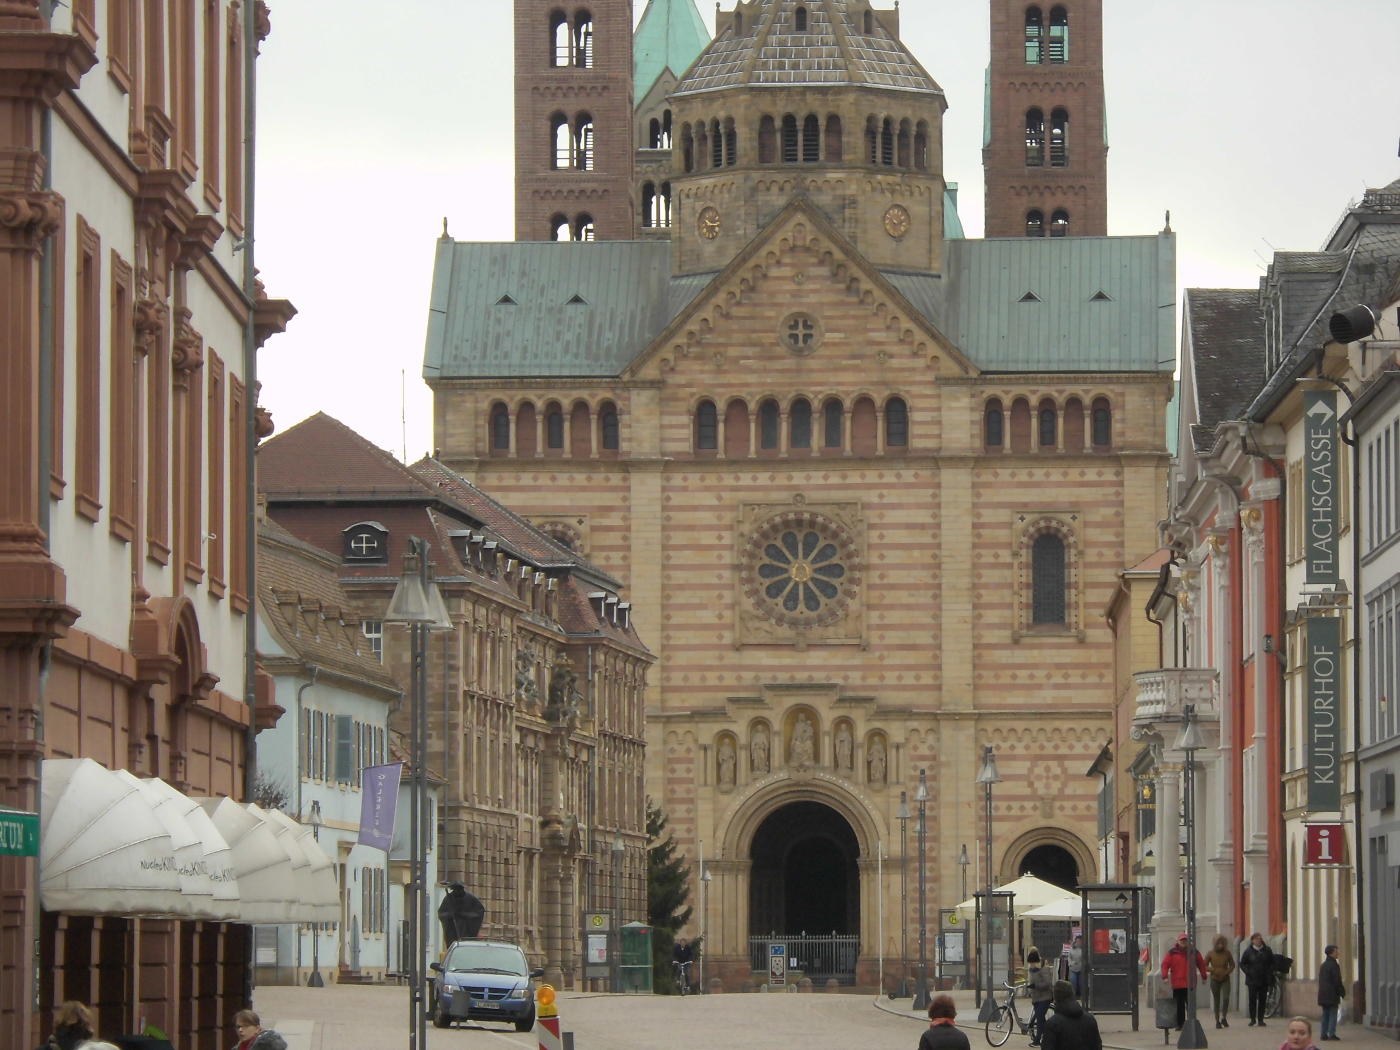 Only one advertiser for the revealed sons of God in Speyer